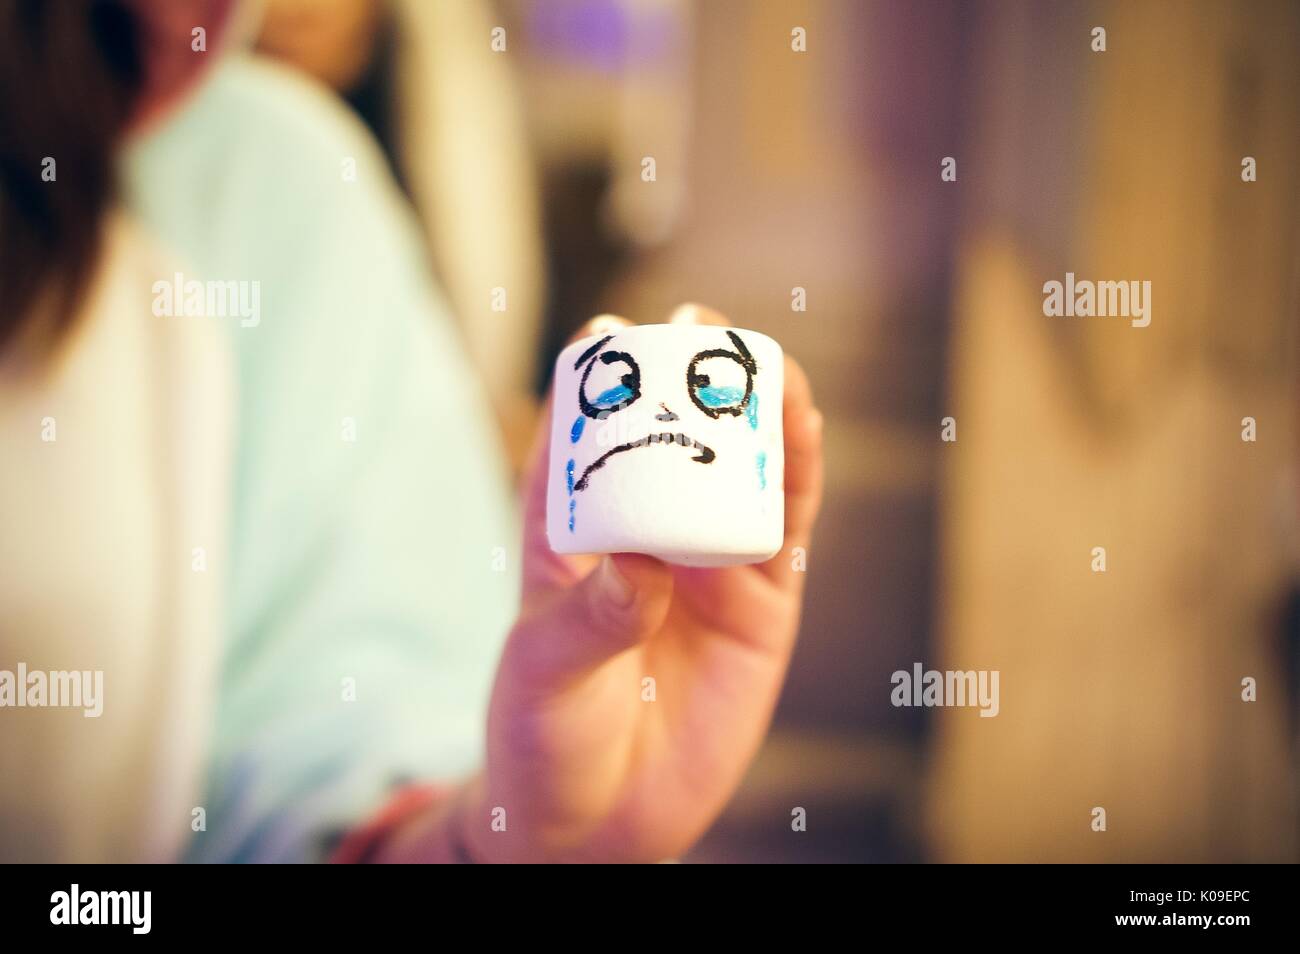 Soft focus photograph of a student holding a marshmallow with a crying face drawn onto it, October 31, 2015. Stock Photo